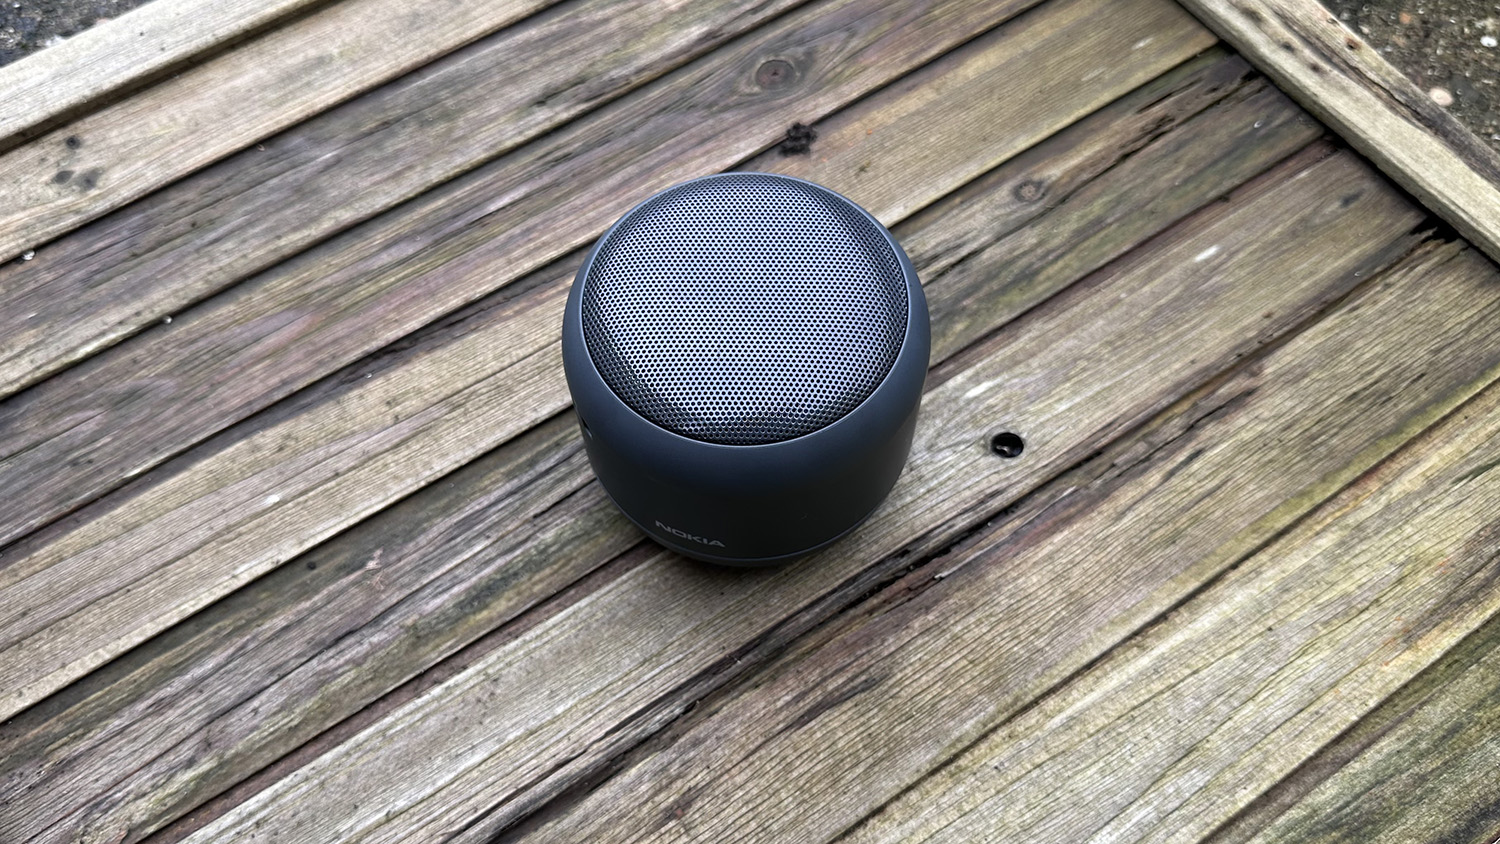 The Nokia Portable Wireless Speaker 2 pictured on a wooden surface